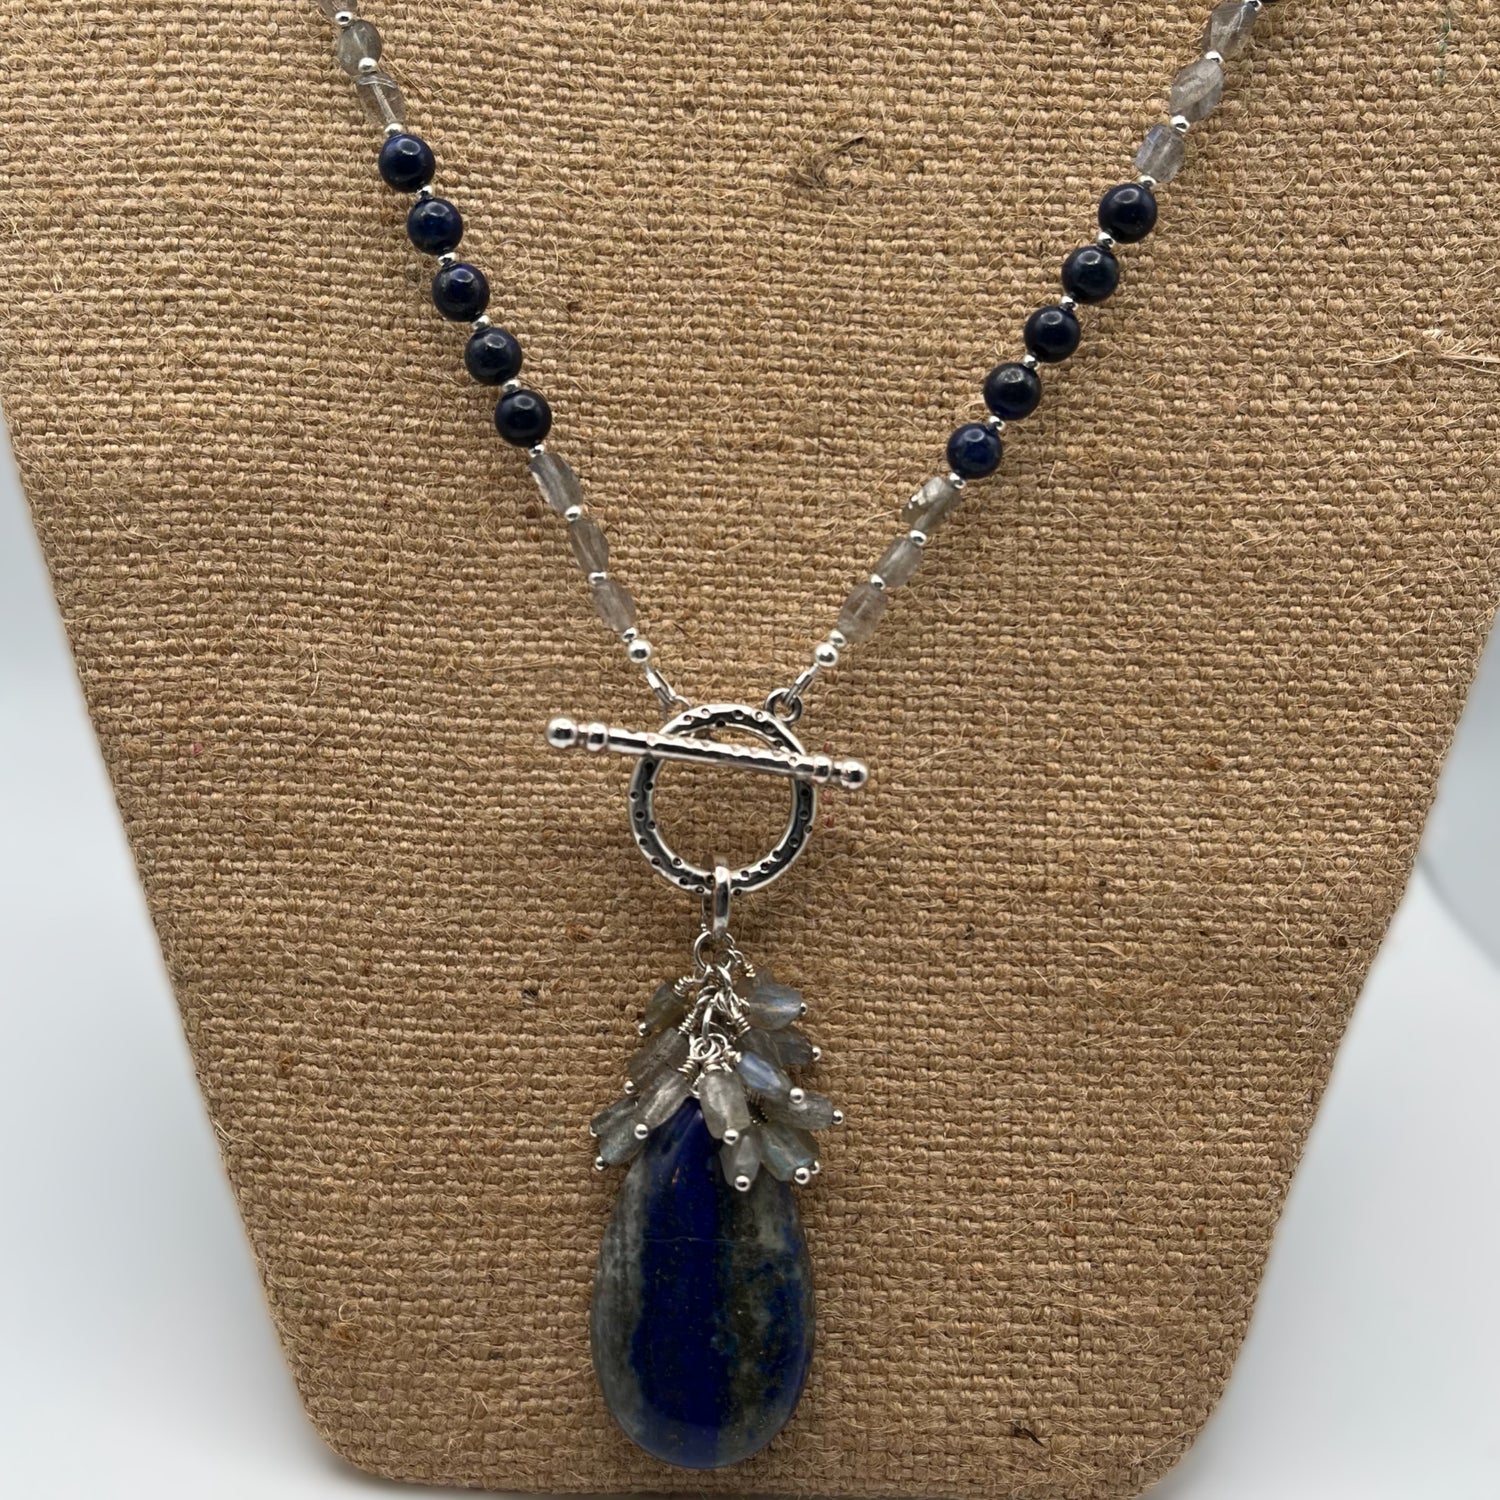 18 inch necklace made with lapis and labradorite beads.  The removeable focal is  a large lapis pear shaped bead accented with labradorite beaded dangles.   